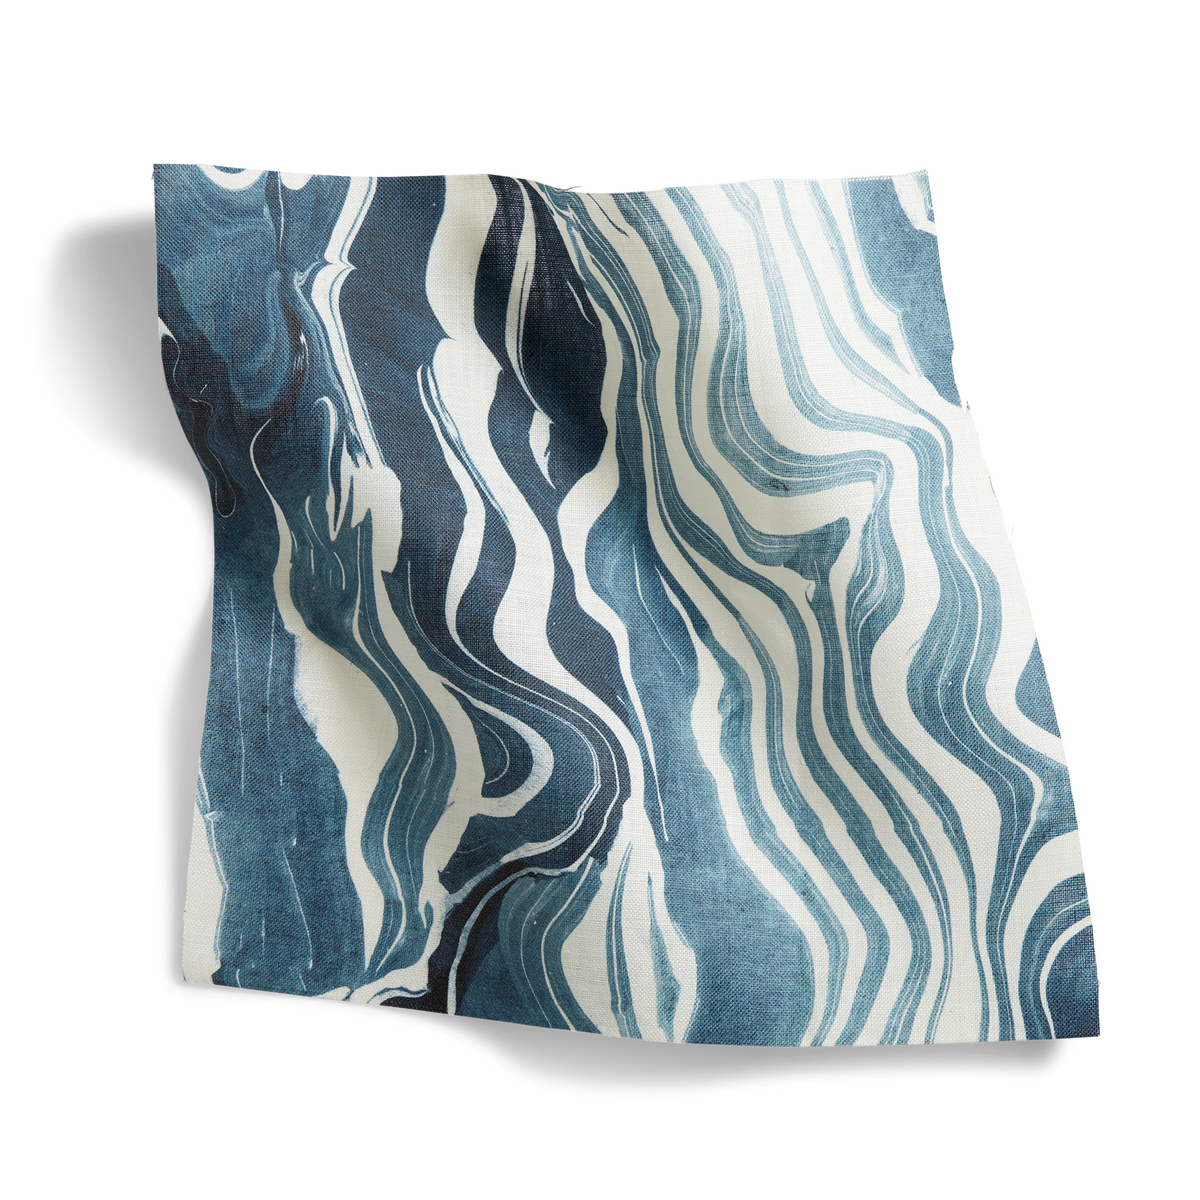 Marbled Stripe Fabric in Navy